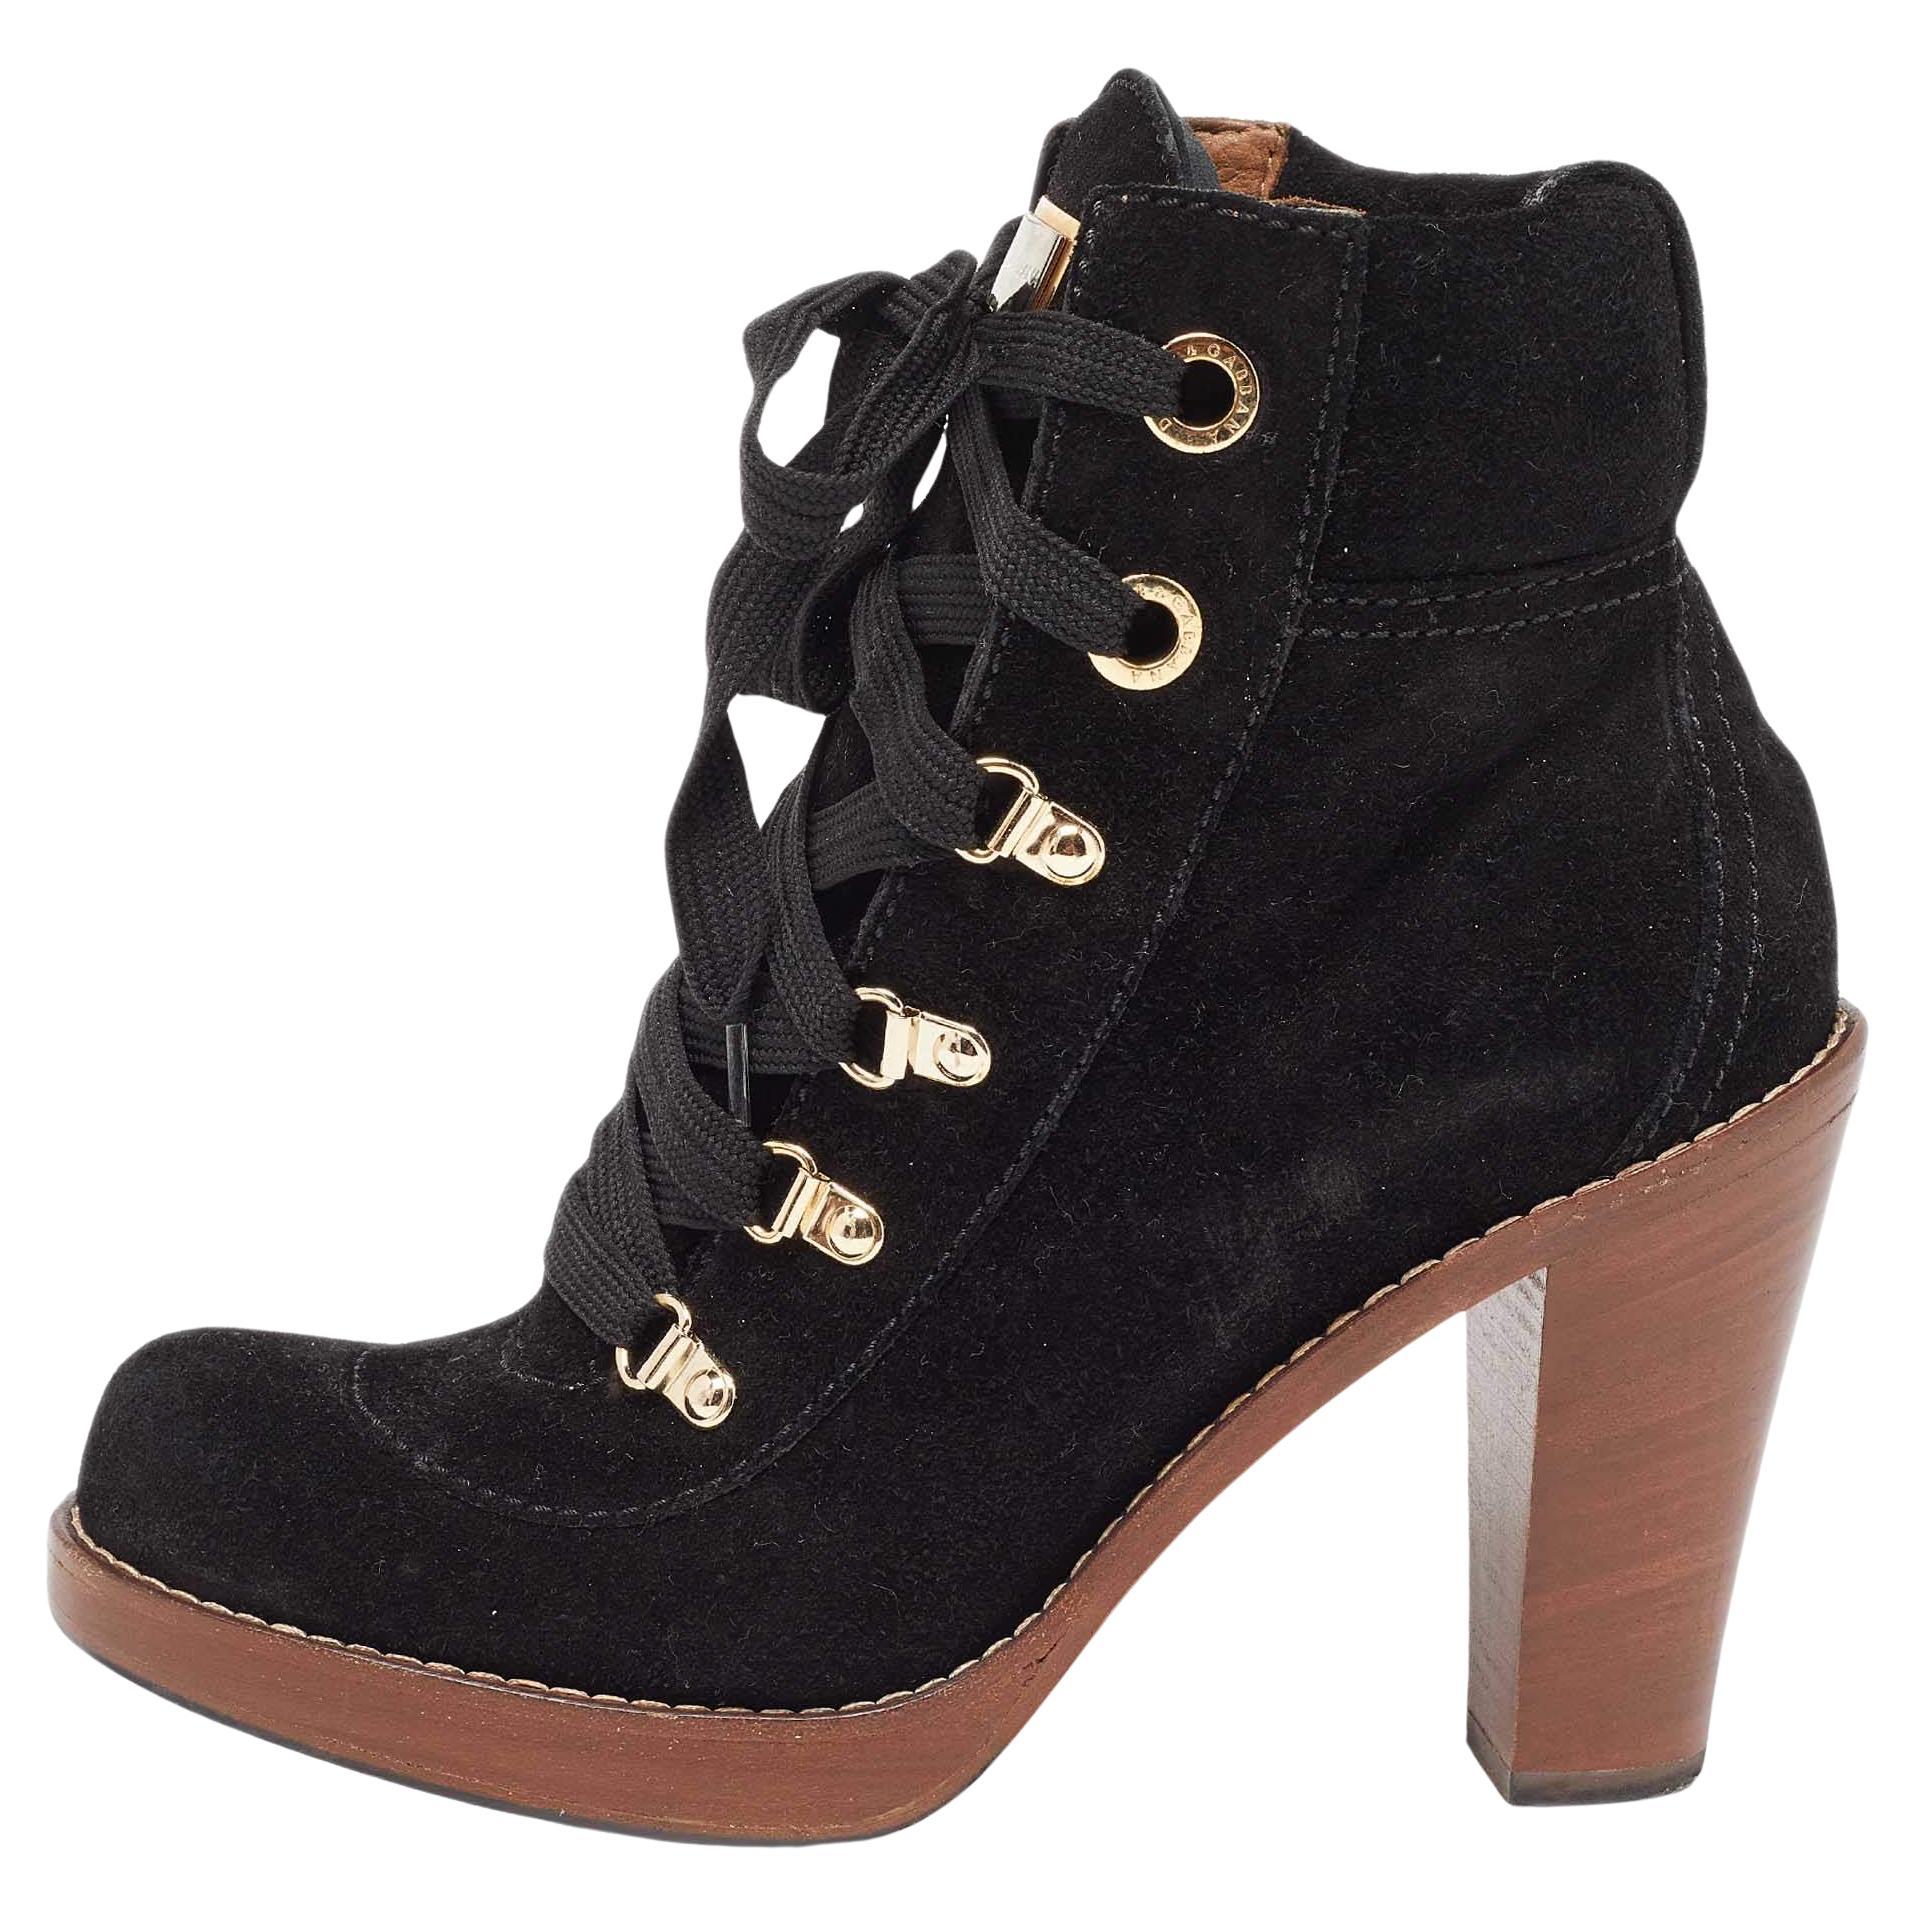 Dolce & Gabbana Black Suede Lace Up Ankle Boots Size 38 For Sale